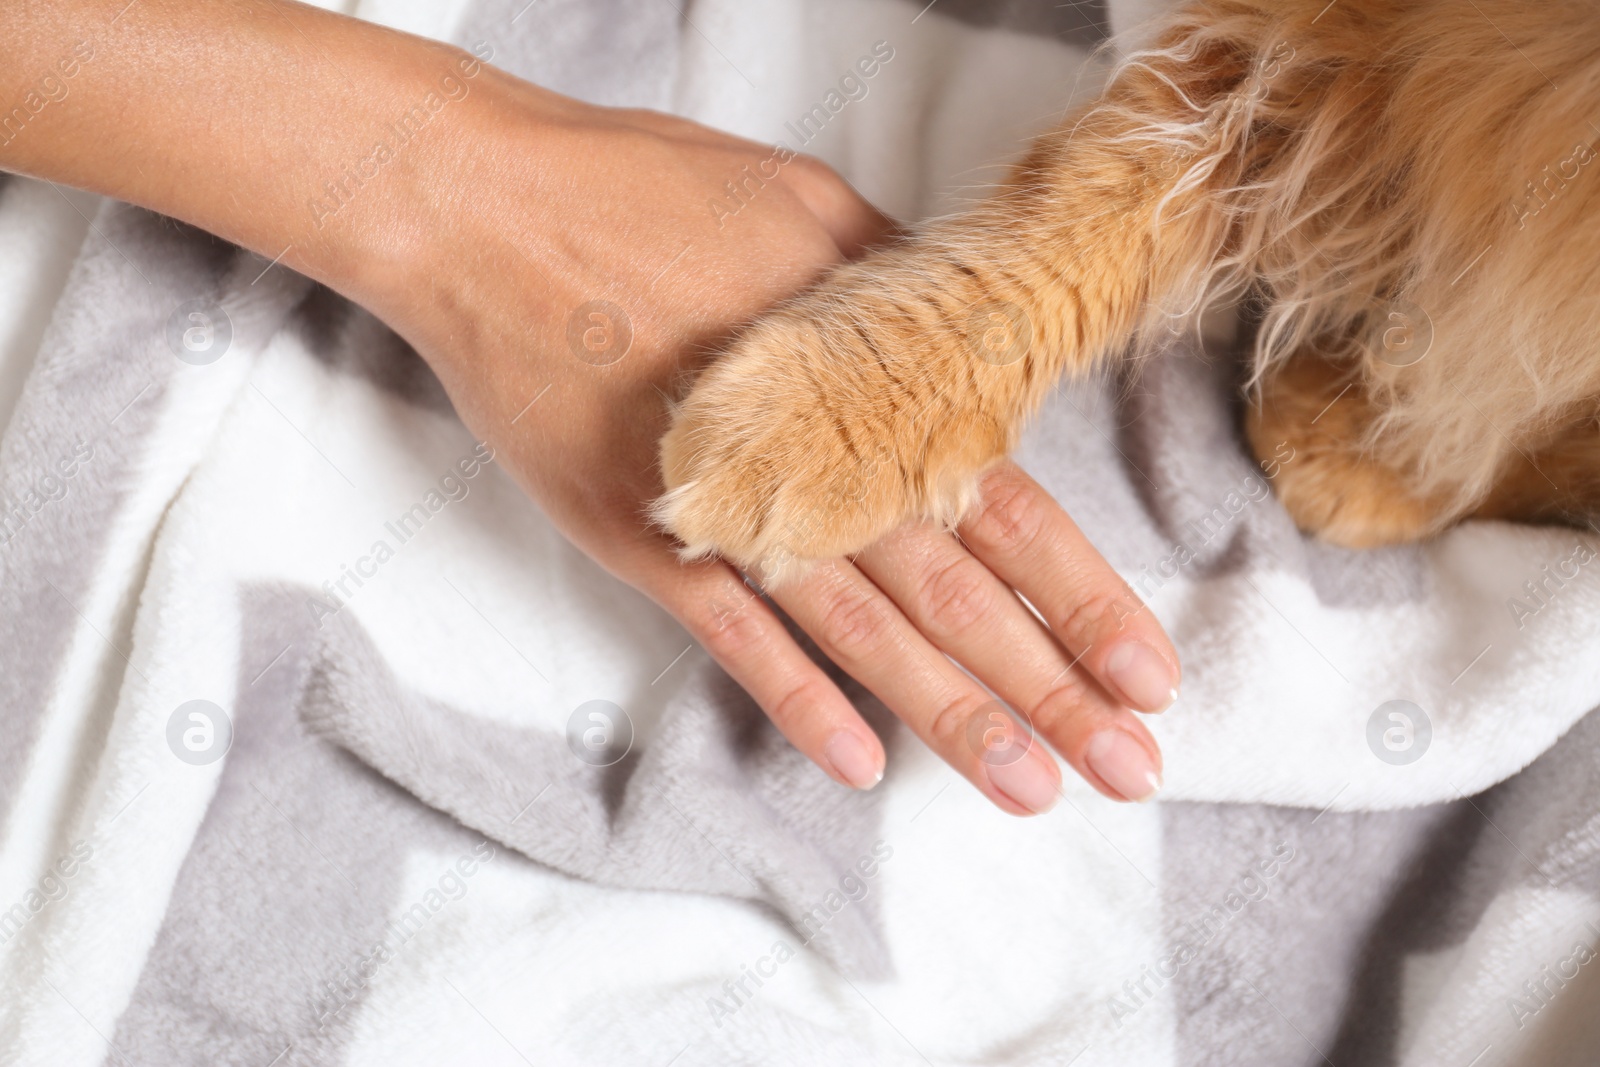 Photo of Woman and cat holding hands together on warm blanket, top view